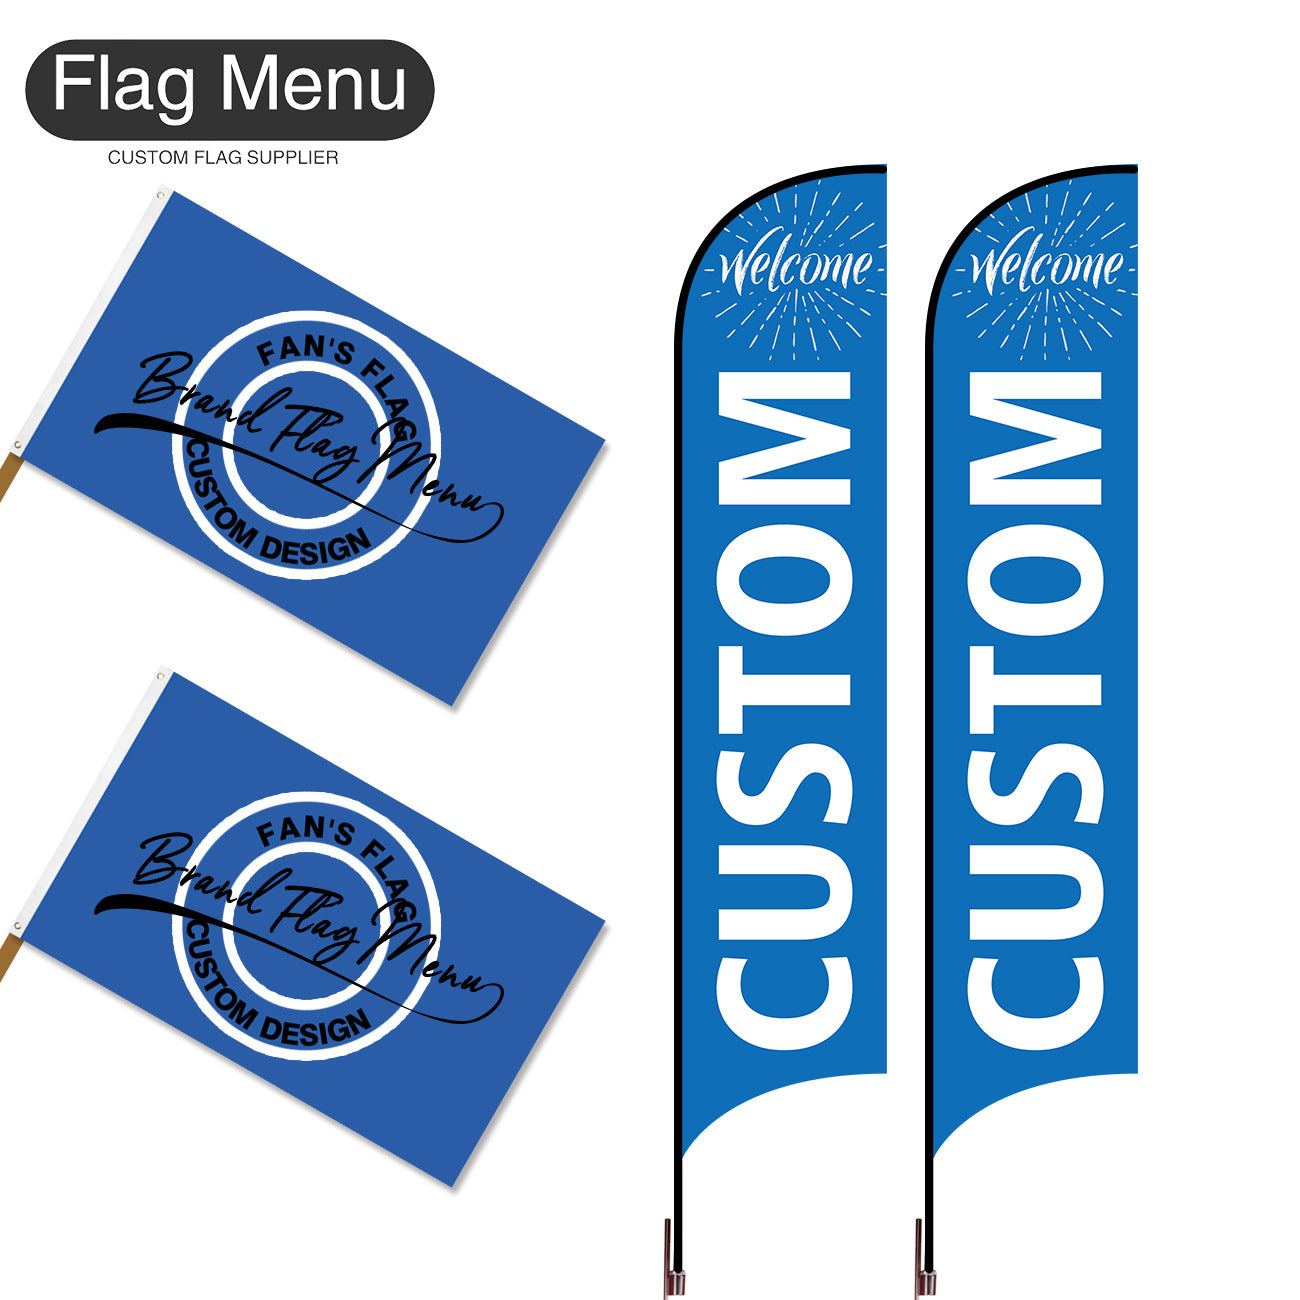 Outdoor Advertising Set - C-Blue B-S - Feather Flag -Double Sided & 3'x5' Regular Flag -Single Sided-Cross & Water Bag-Flag Menu